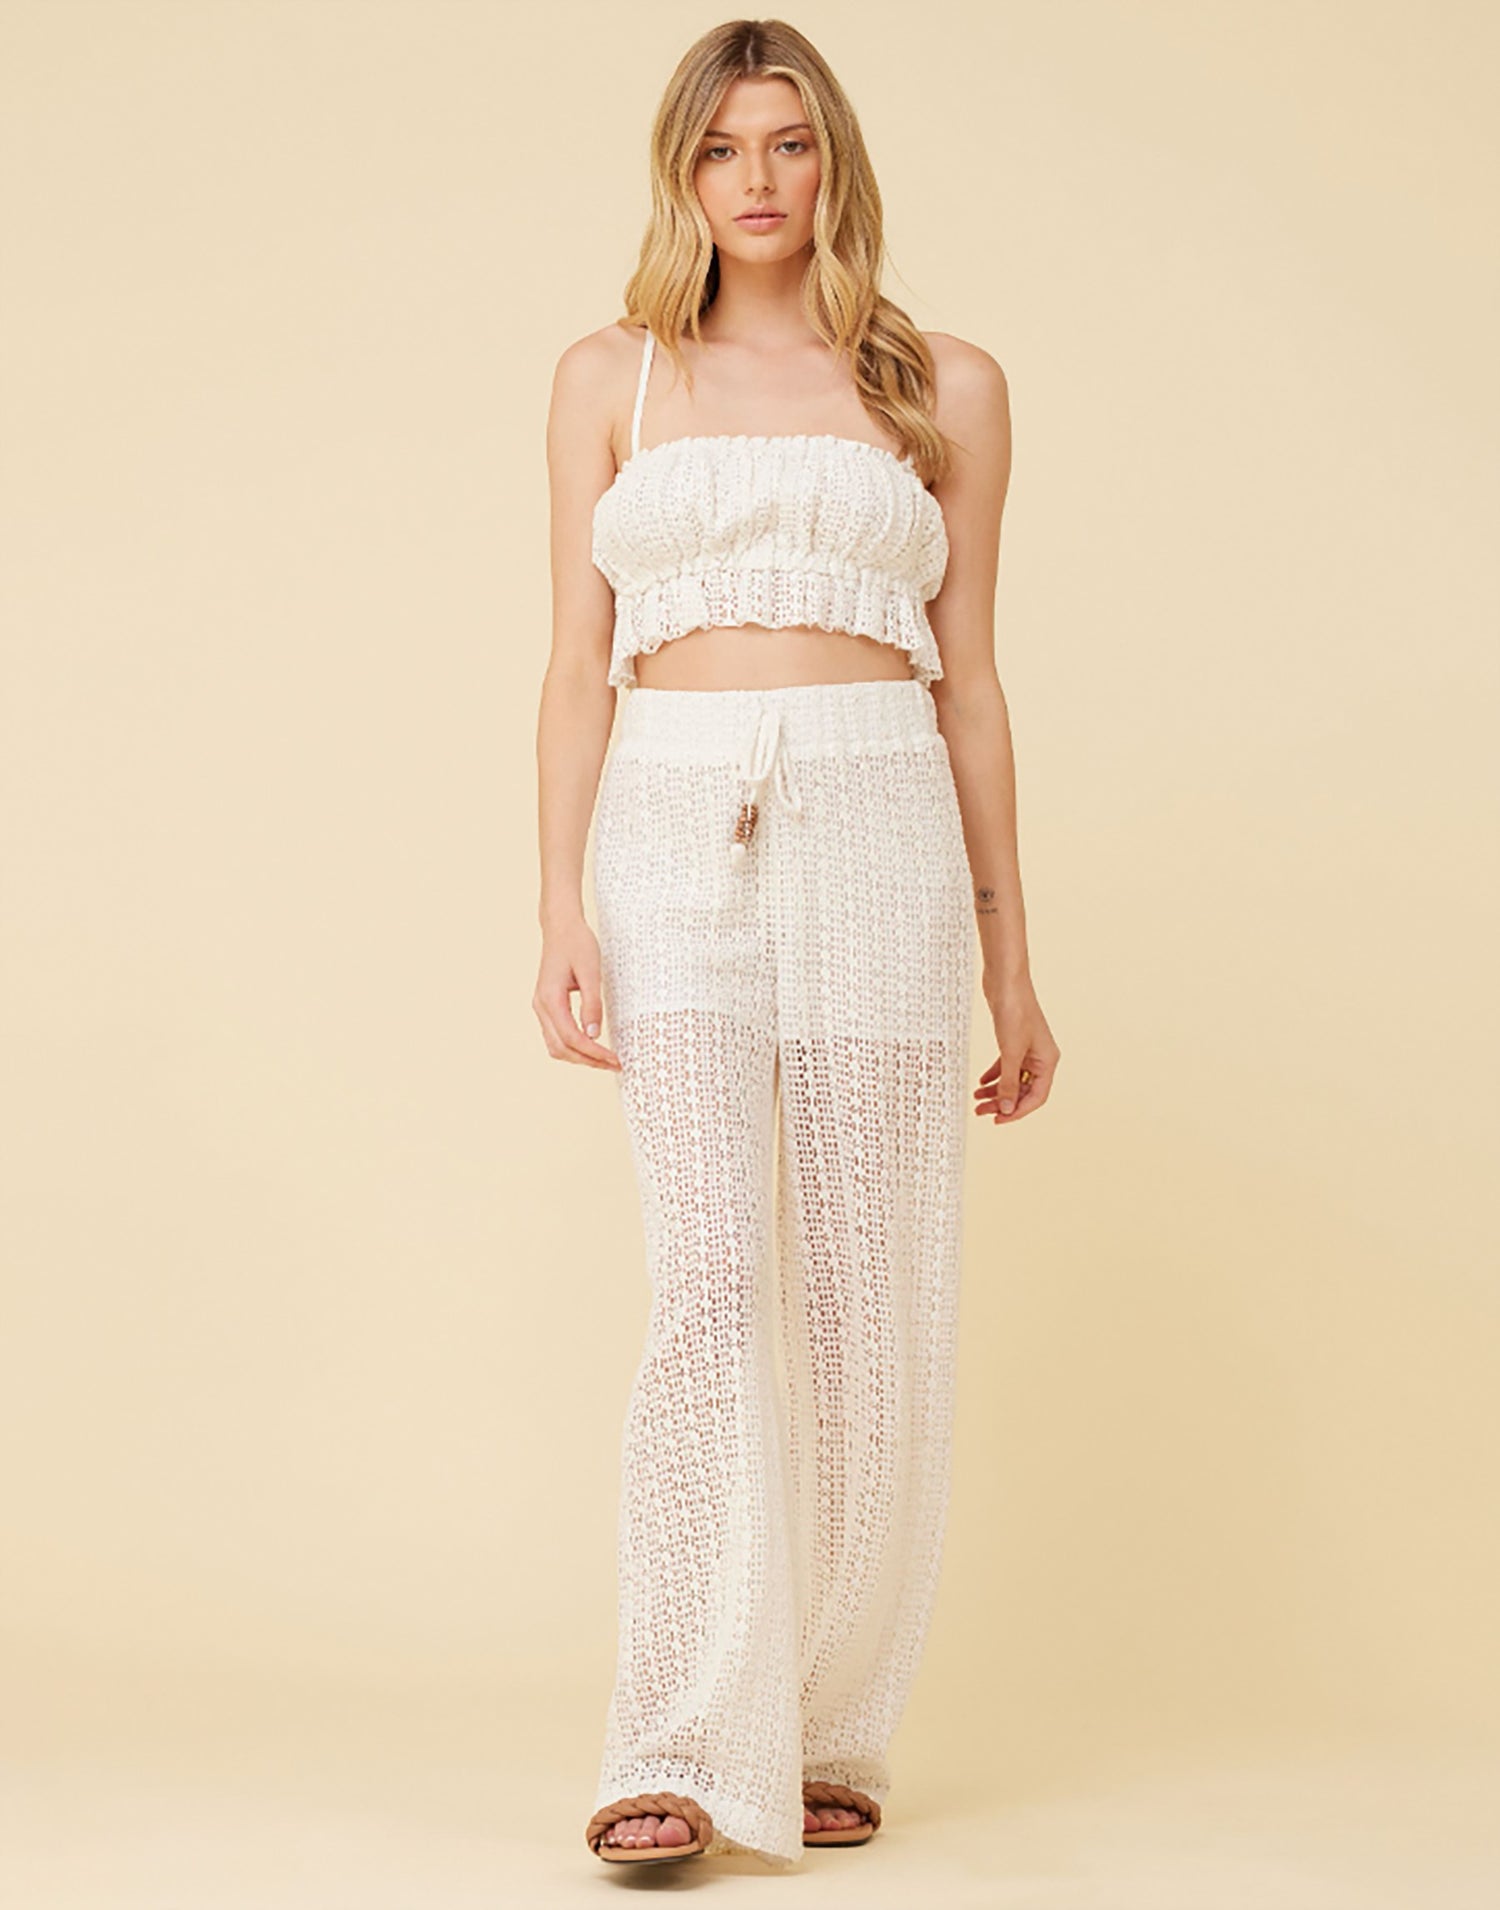 Vertical Stripe Crochet Surplice Crop Top by Surf Gypsy in White - Front View